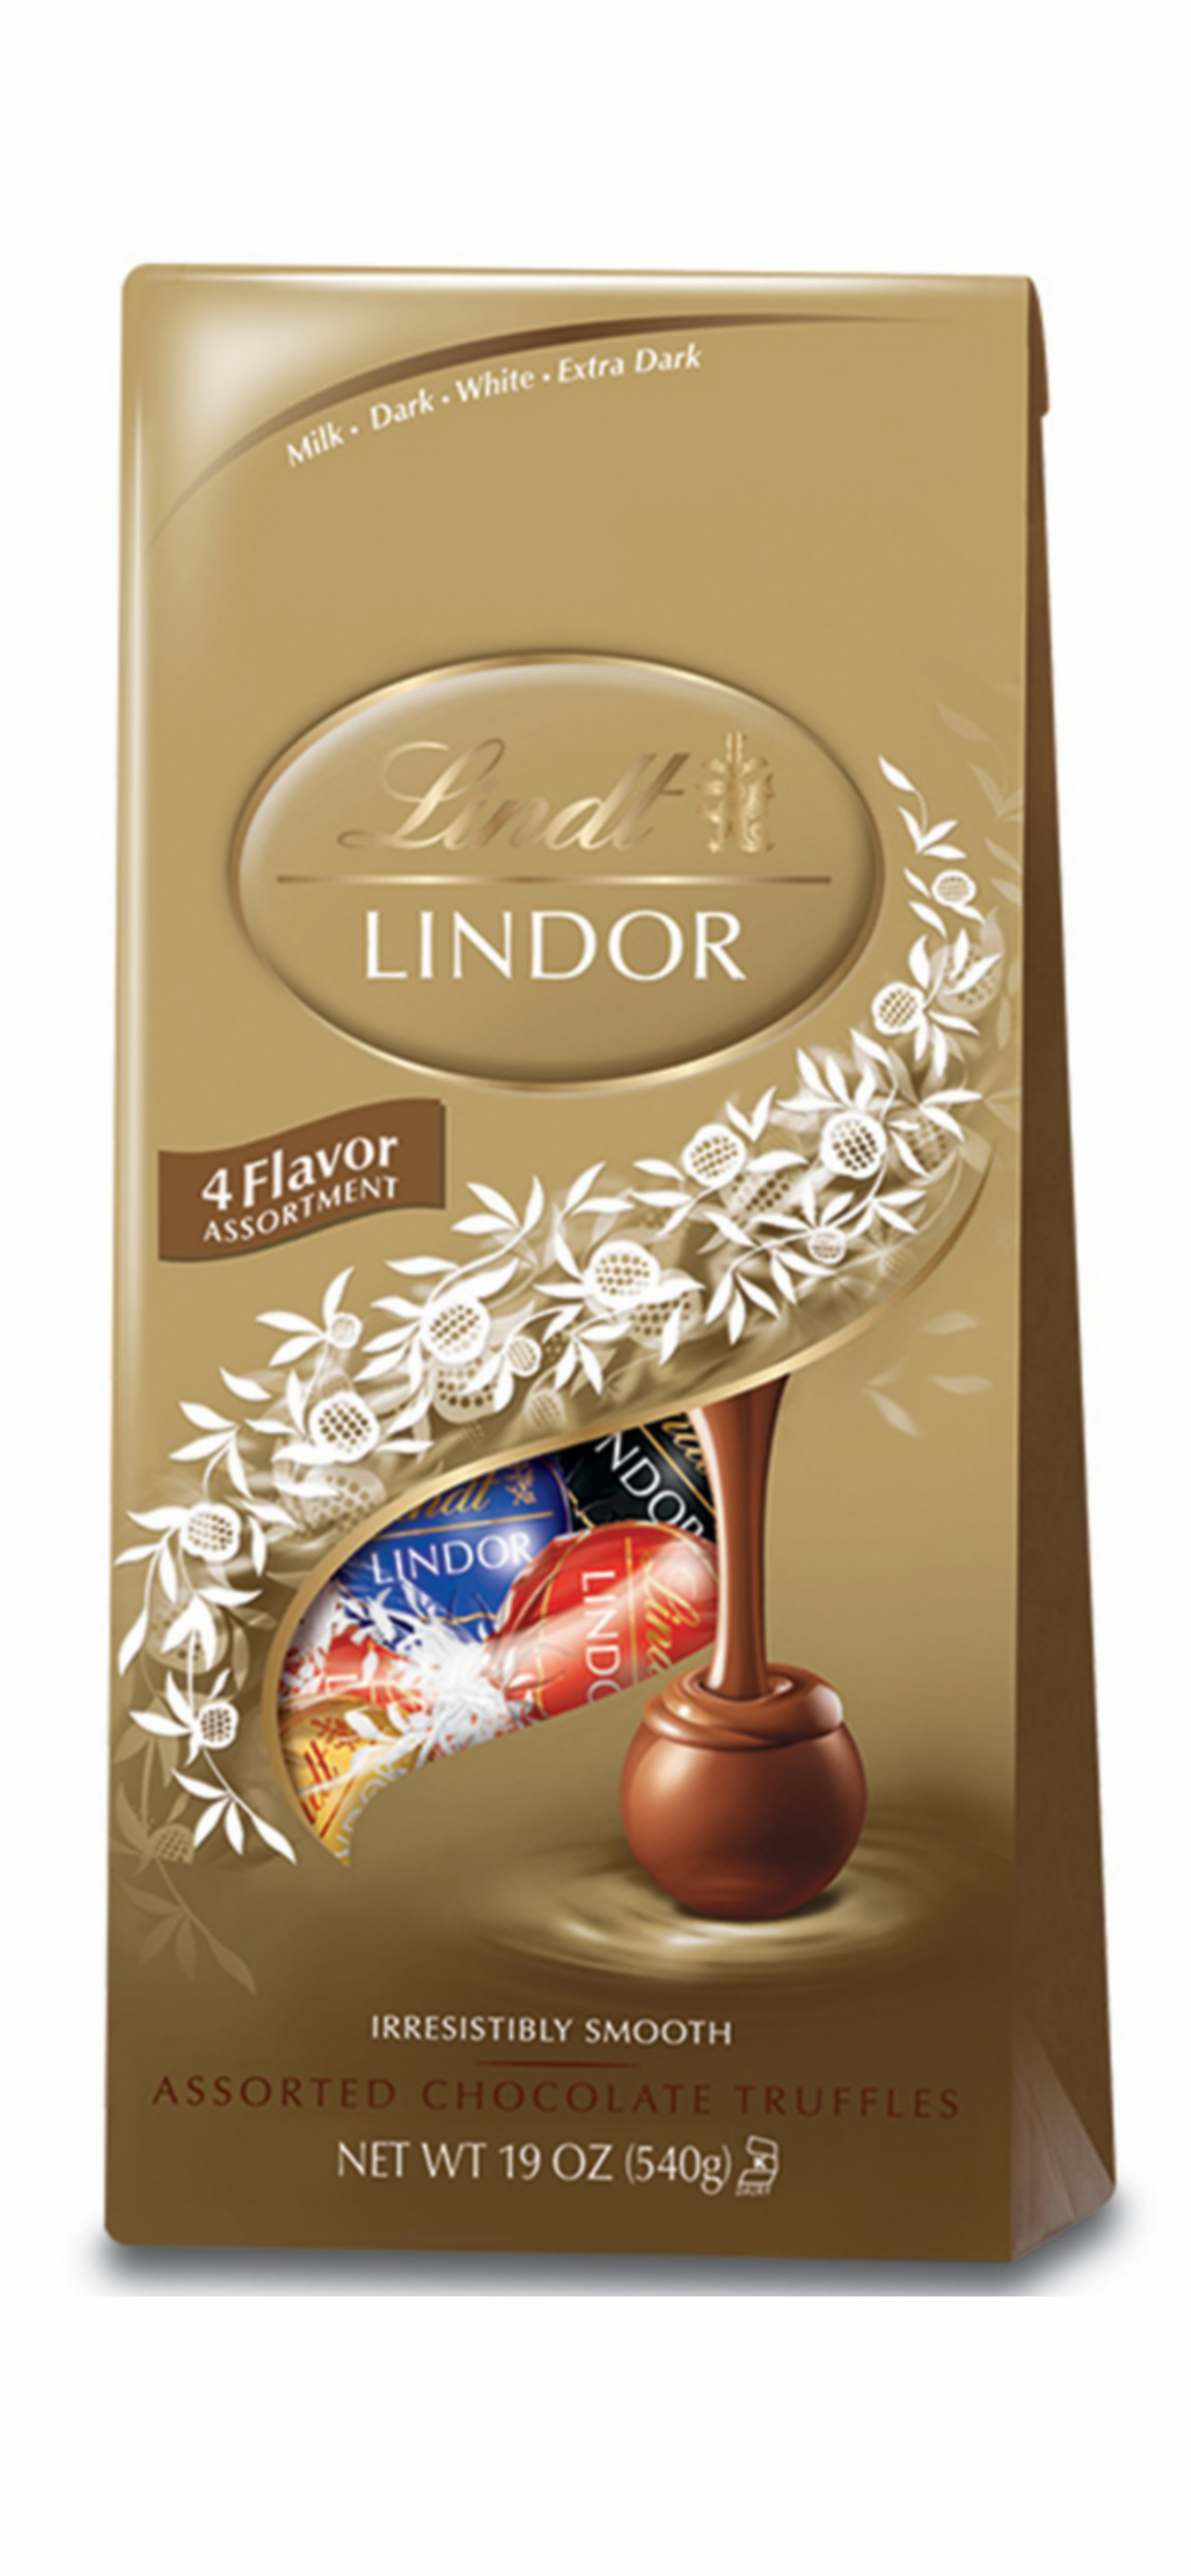 ILY Cards + Lindor 4 Flavor Assortment Chocolate Truffles (540g) - Donated Goods & Services